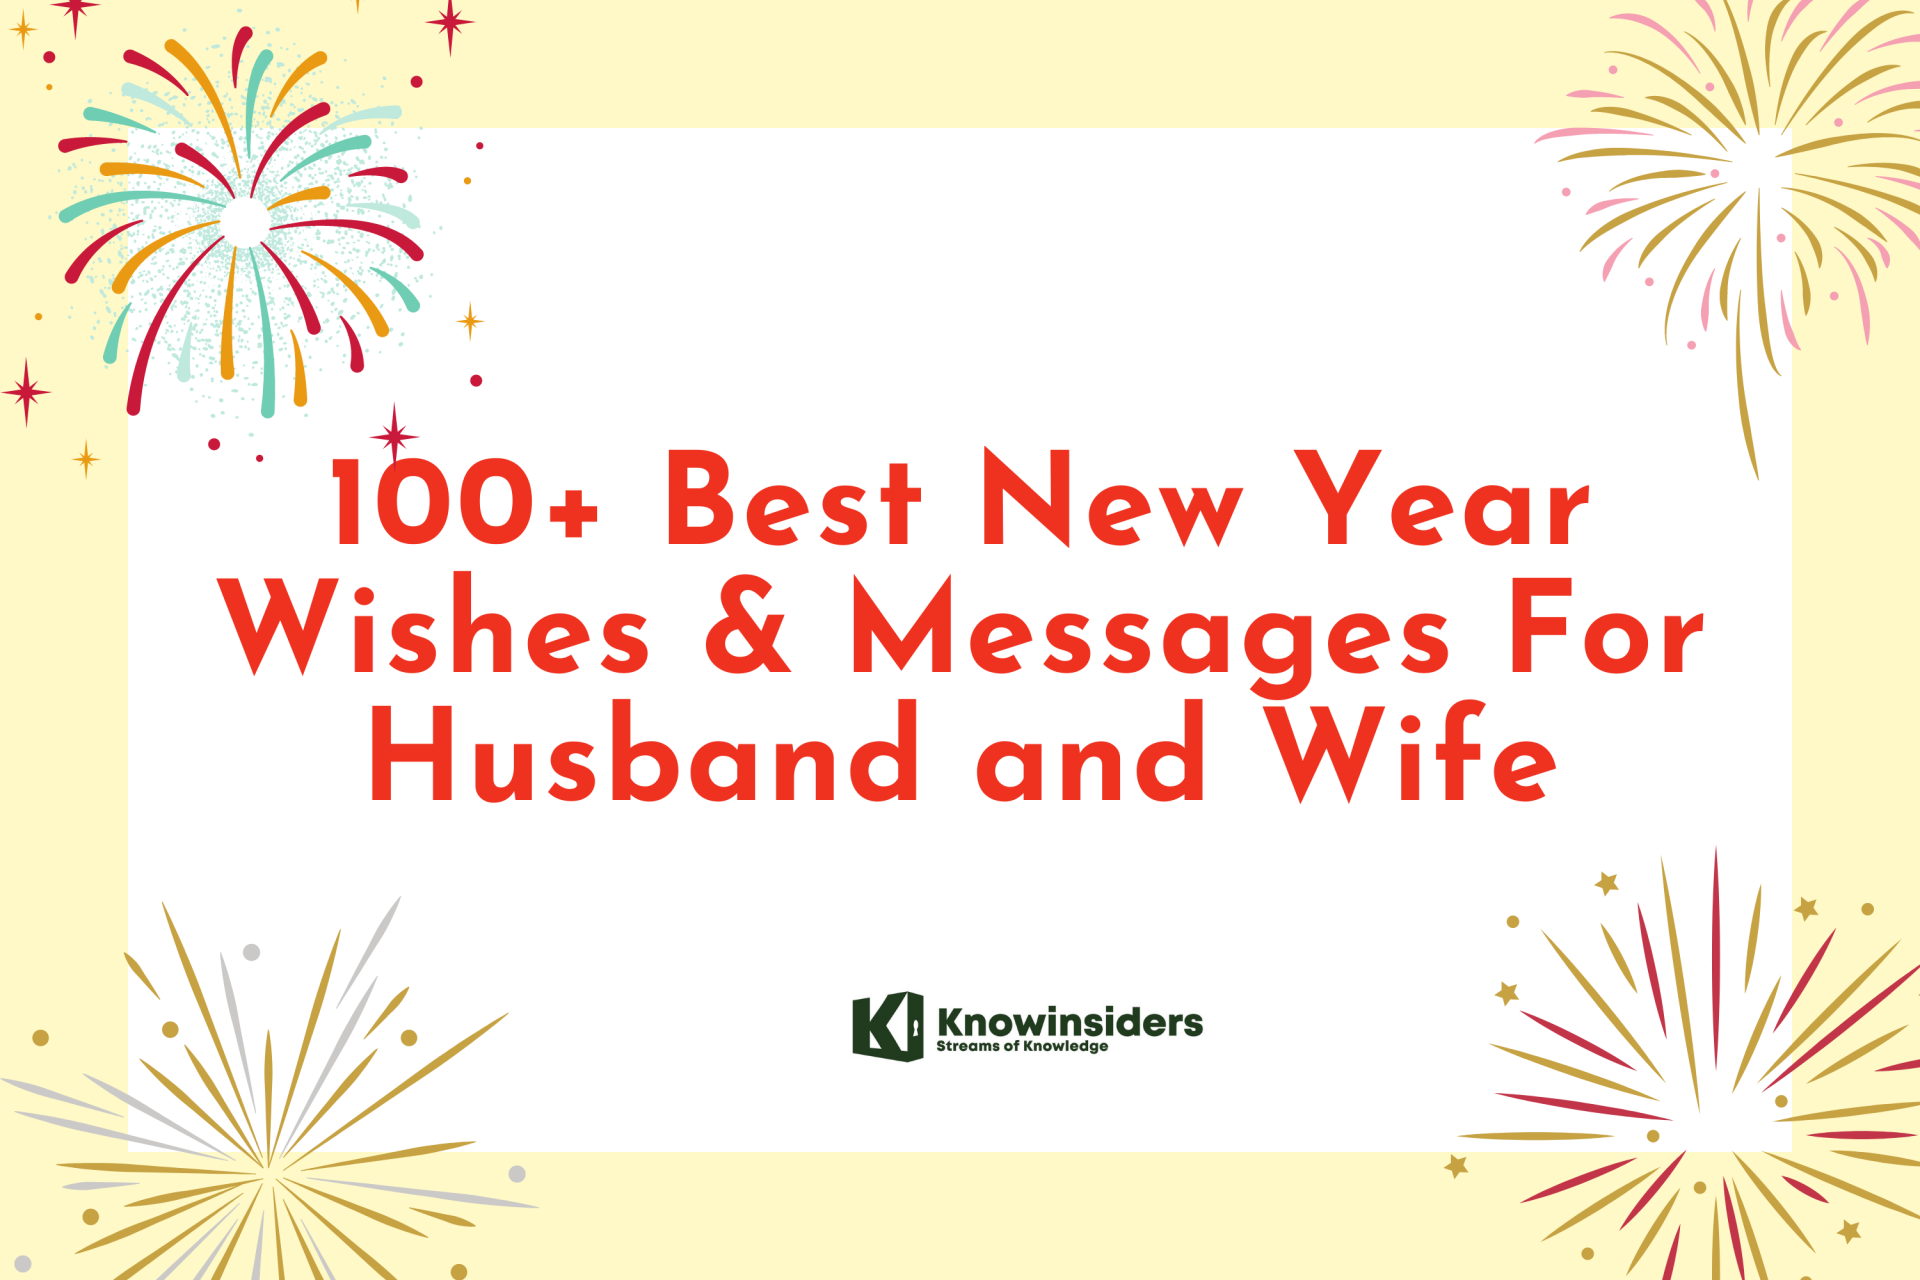 New Year Best wishes for husband and wife. Photo: KnowInsders